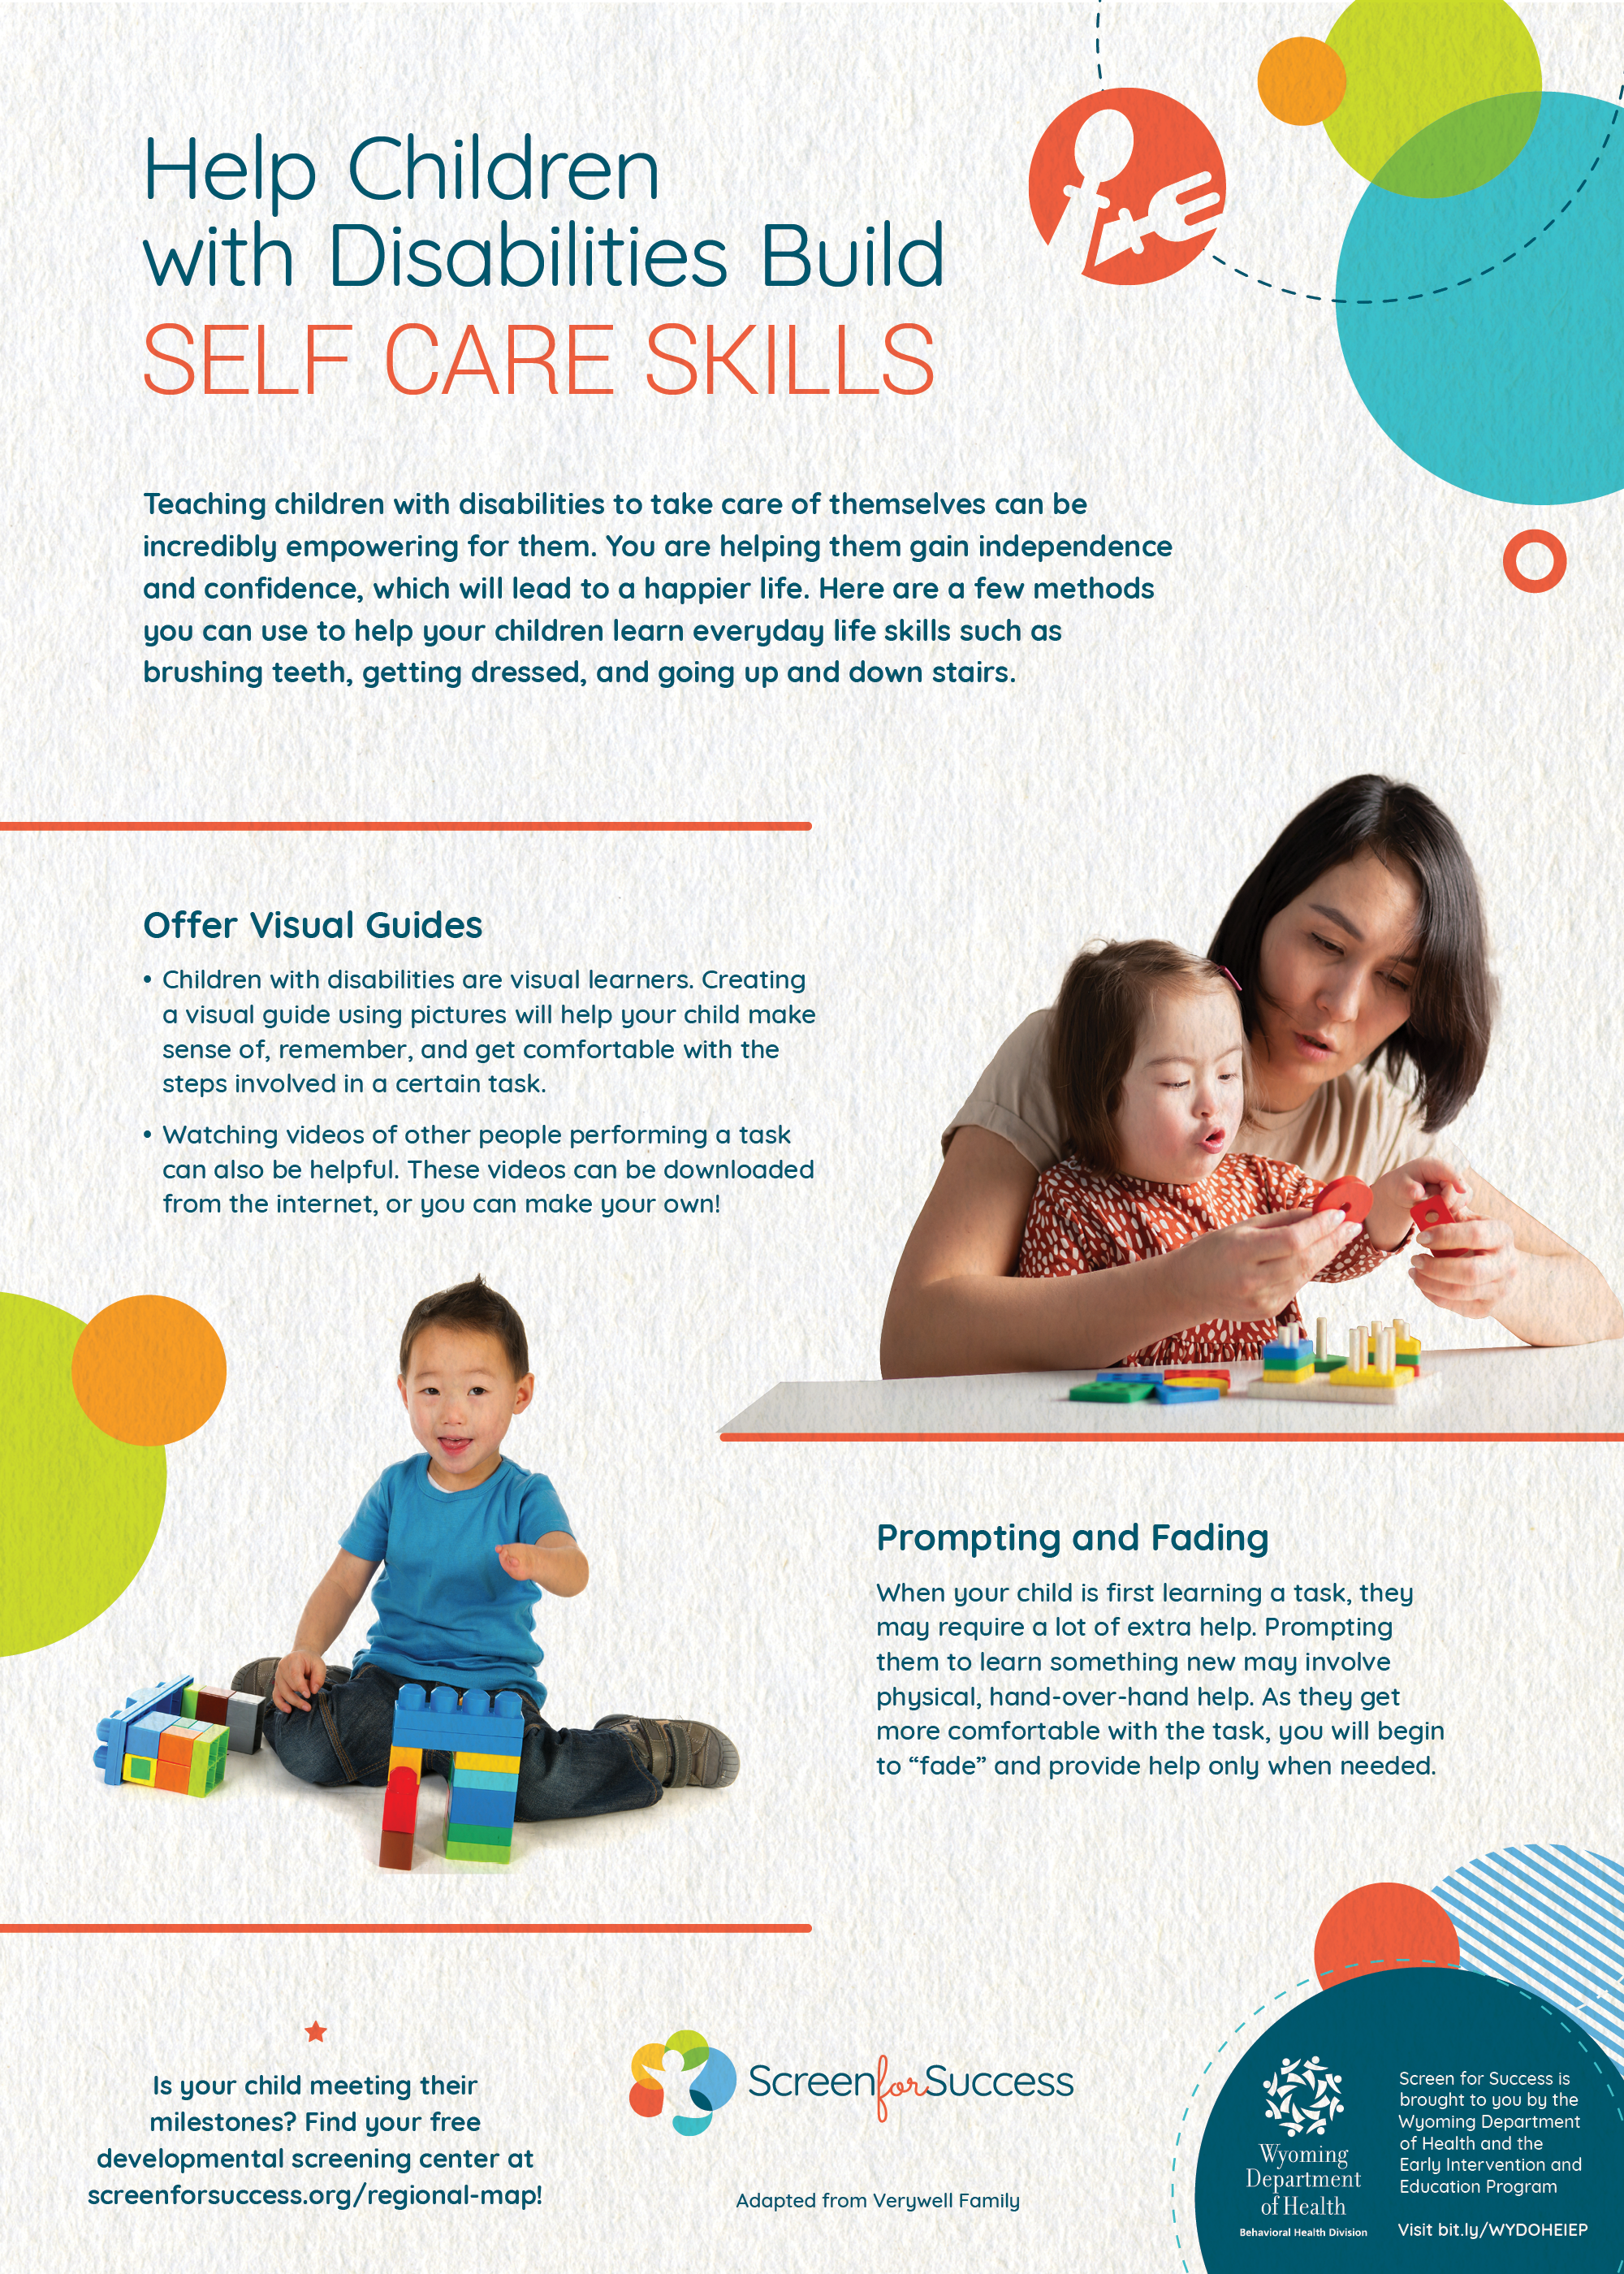 How To Help Children with Disabilities Build Adaptive Skills